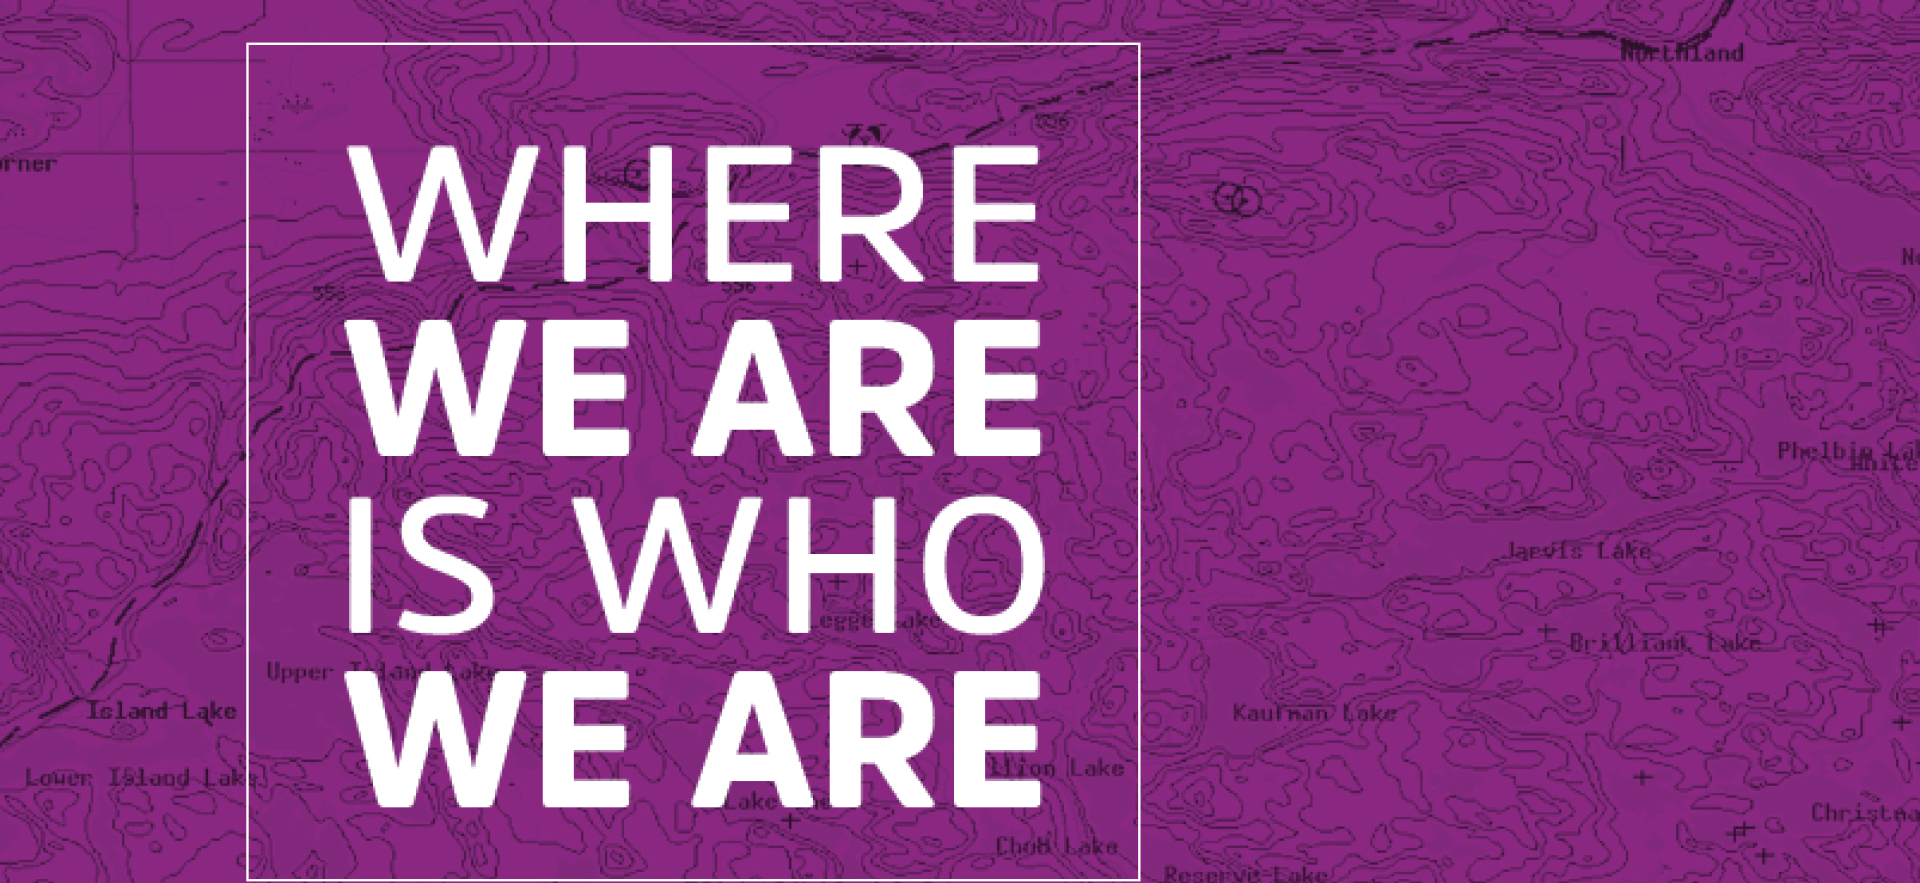 Viewbook 2022-23 Cover with purple curved map background with Where we are is who we are titled